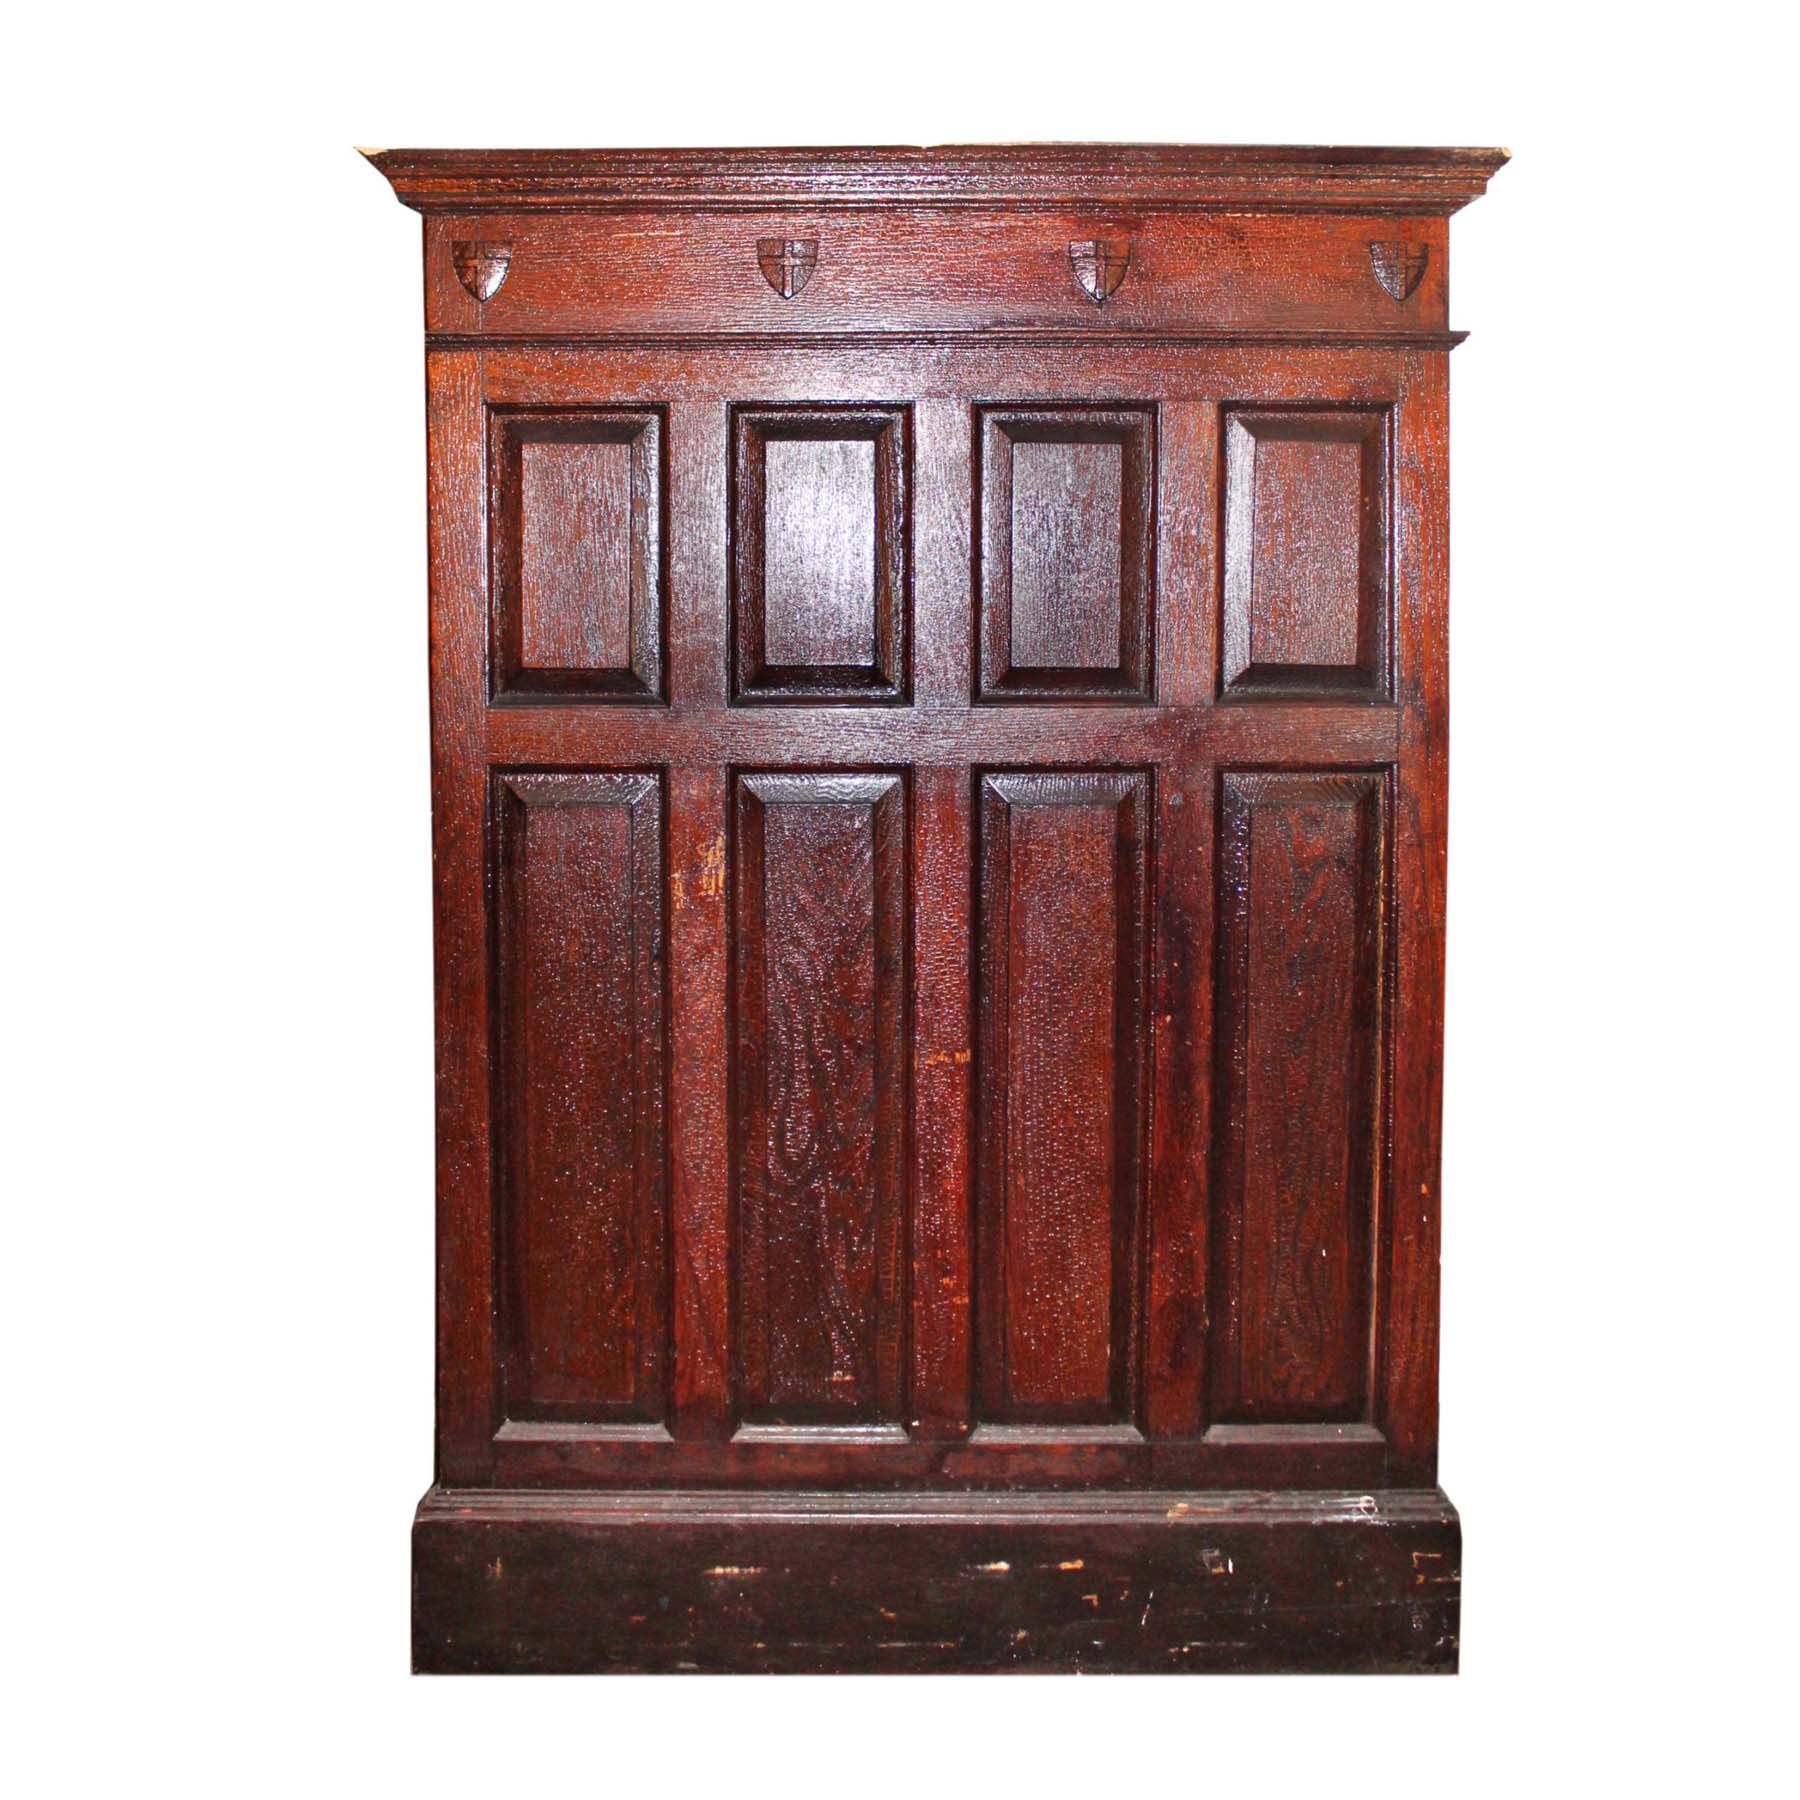 SOLD Salvaged Antique Tudor Wainscoting Panels -0